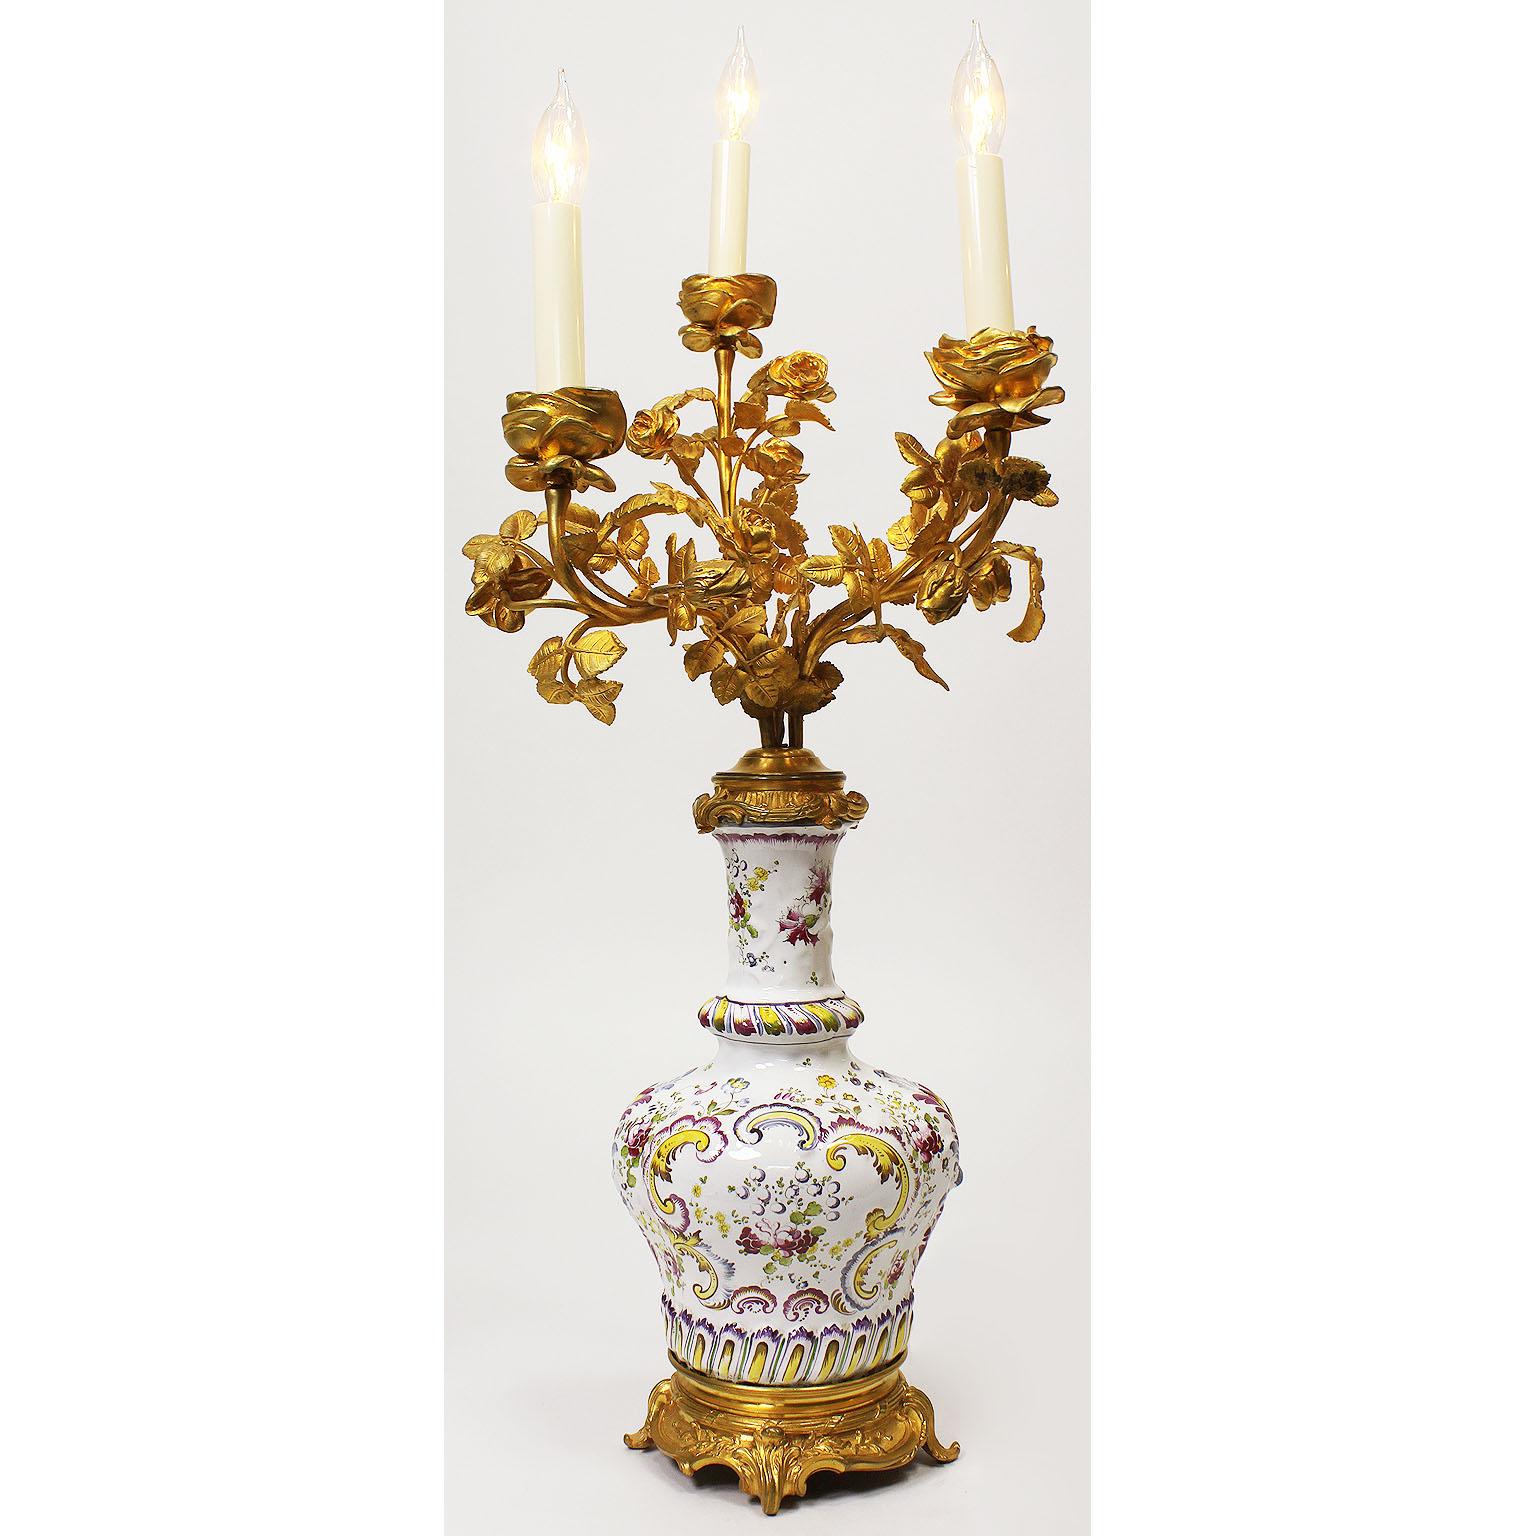 A fine pair of French 19th-20th century Louis XV style gilt bronze and Faience porcelain three-light candelabra table lamps. The ovoid porcelain urn hand decorated in floral burgundy, yellow and gold design, surmounted with an intricate three-light